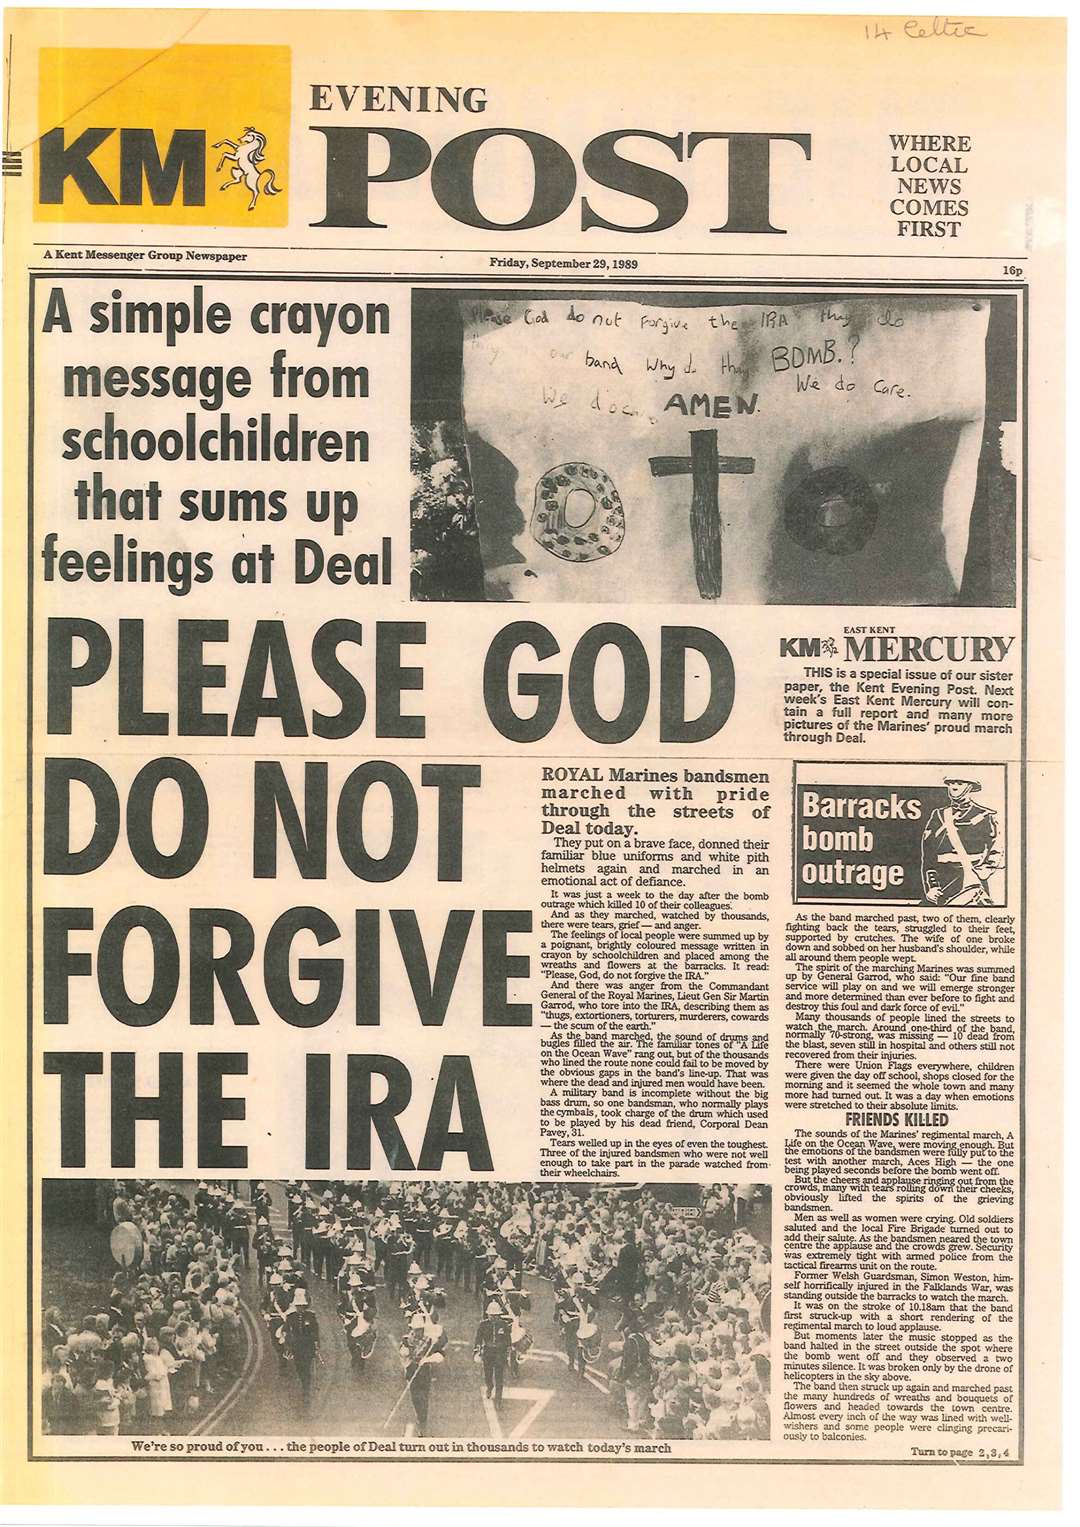 The Evening Post, another KM paper, carries the bold message not to forgive the murderers, the IRA